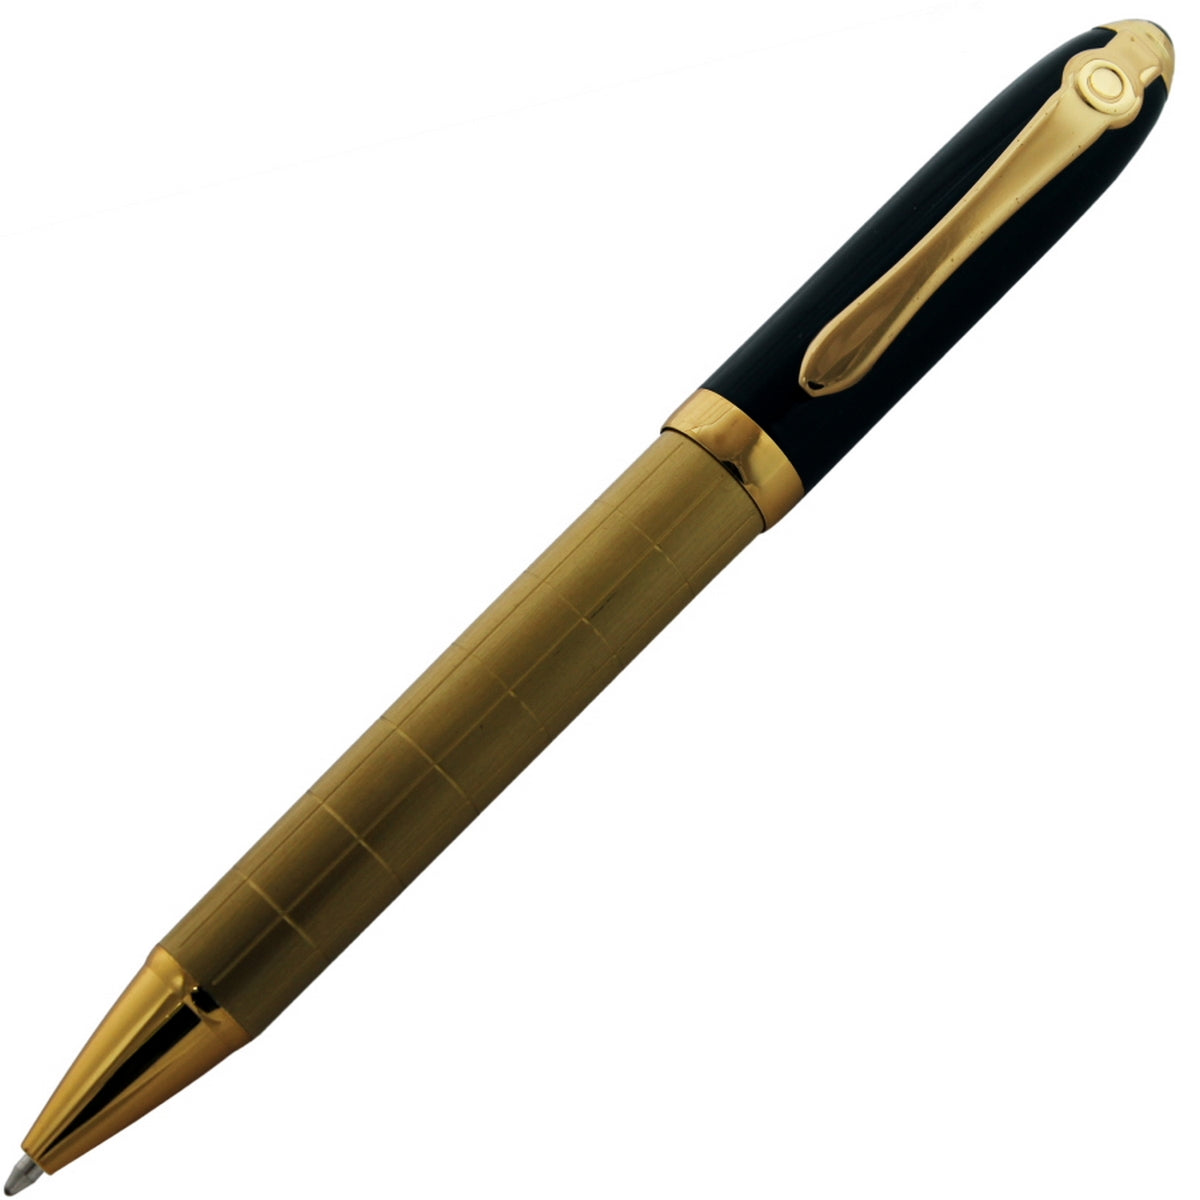 Antique Smooth Writing Black and Gold Finish Metal Ball Pen - For Office, College, Personal Use, Corporate Gifting, Return Gift - Warangal-JA701BPHG